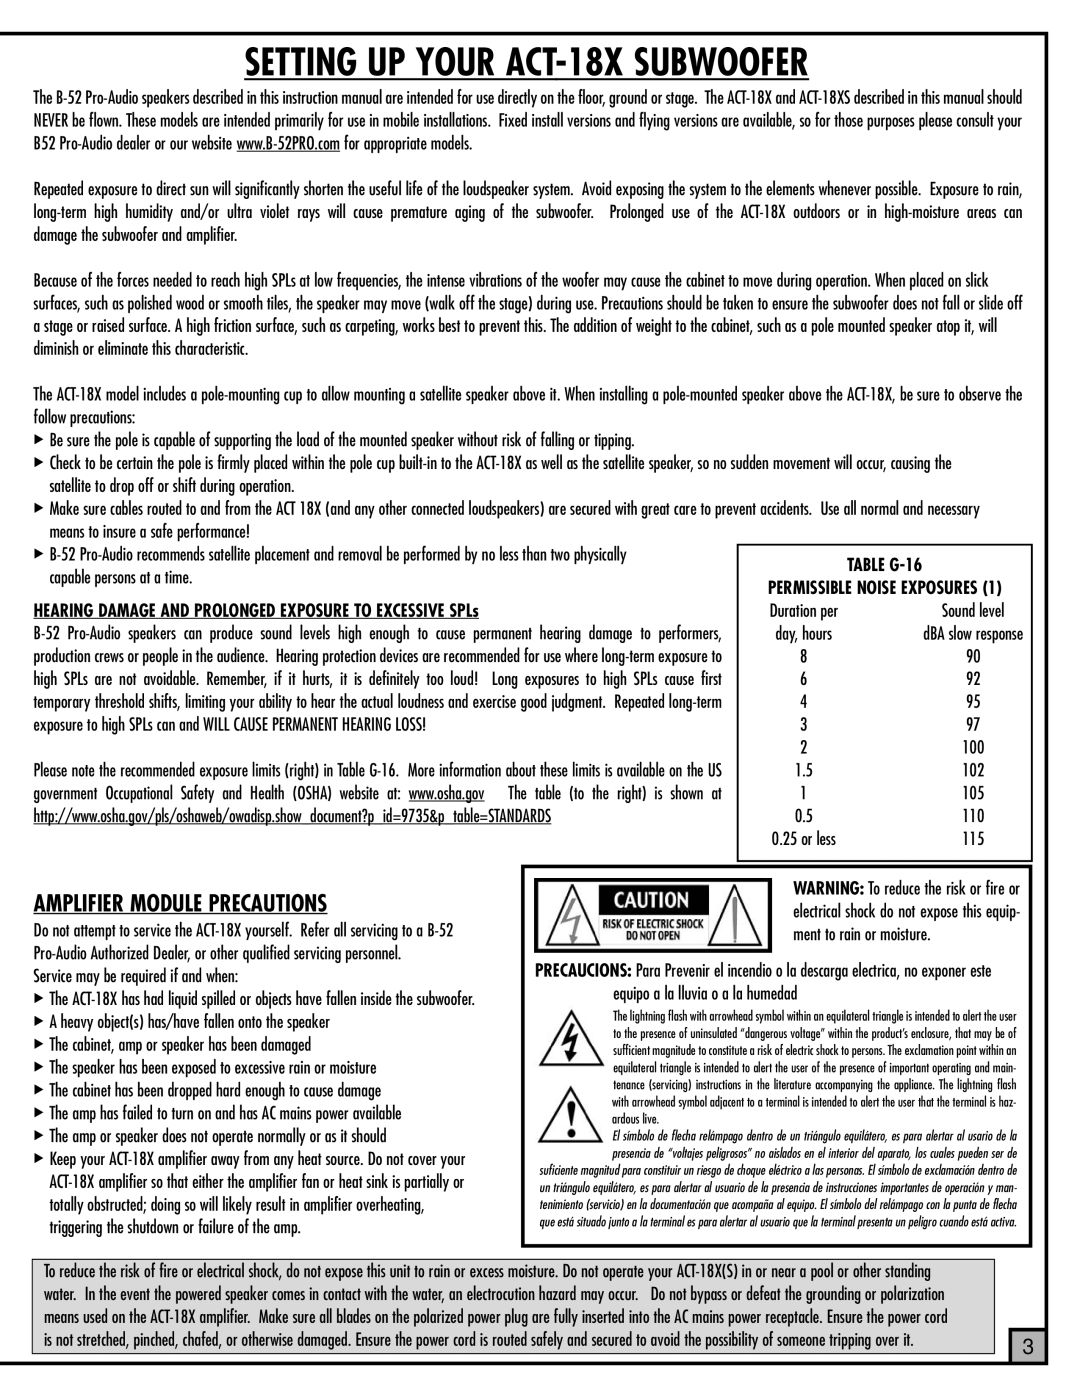 ETI Sound Systems, INC manual SETTING UP YOUR ACT-18XSUBWOOFER, Amplifier Module Precautions 